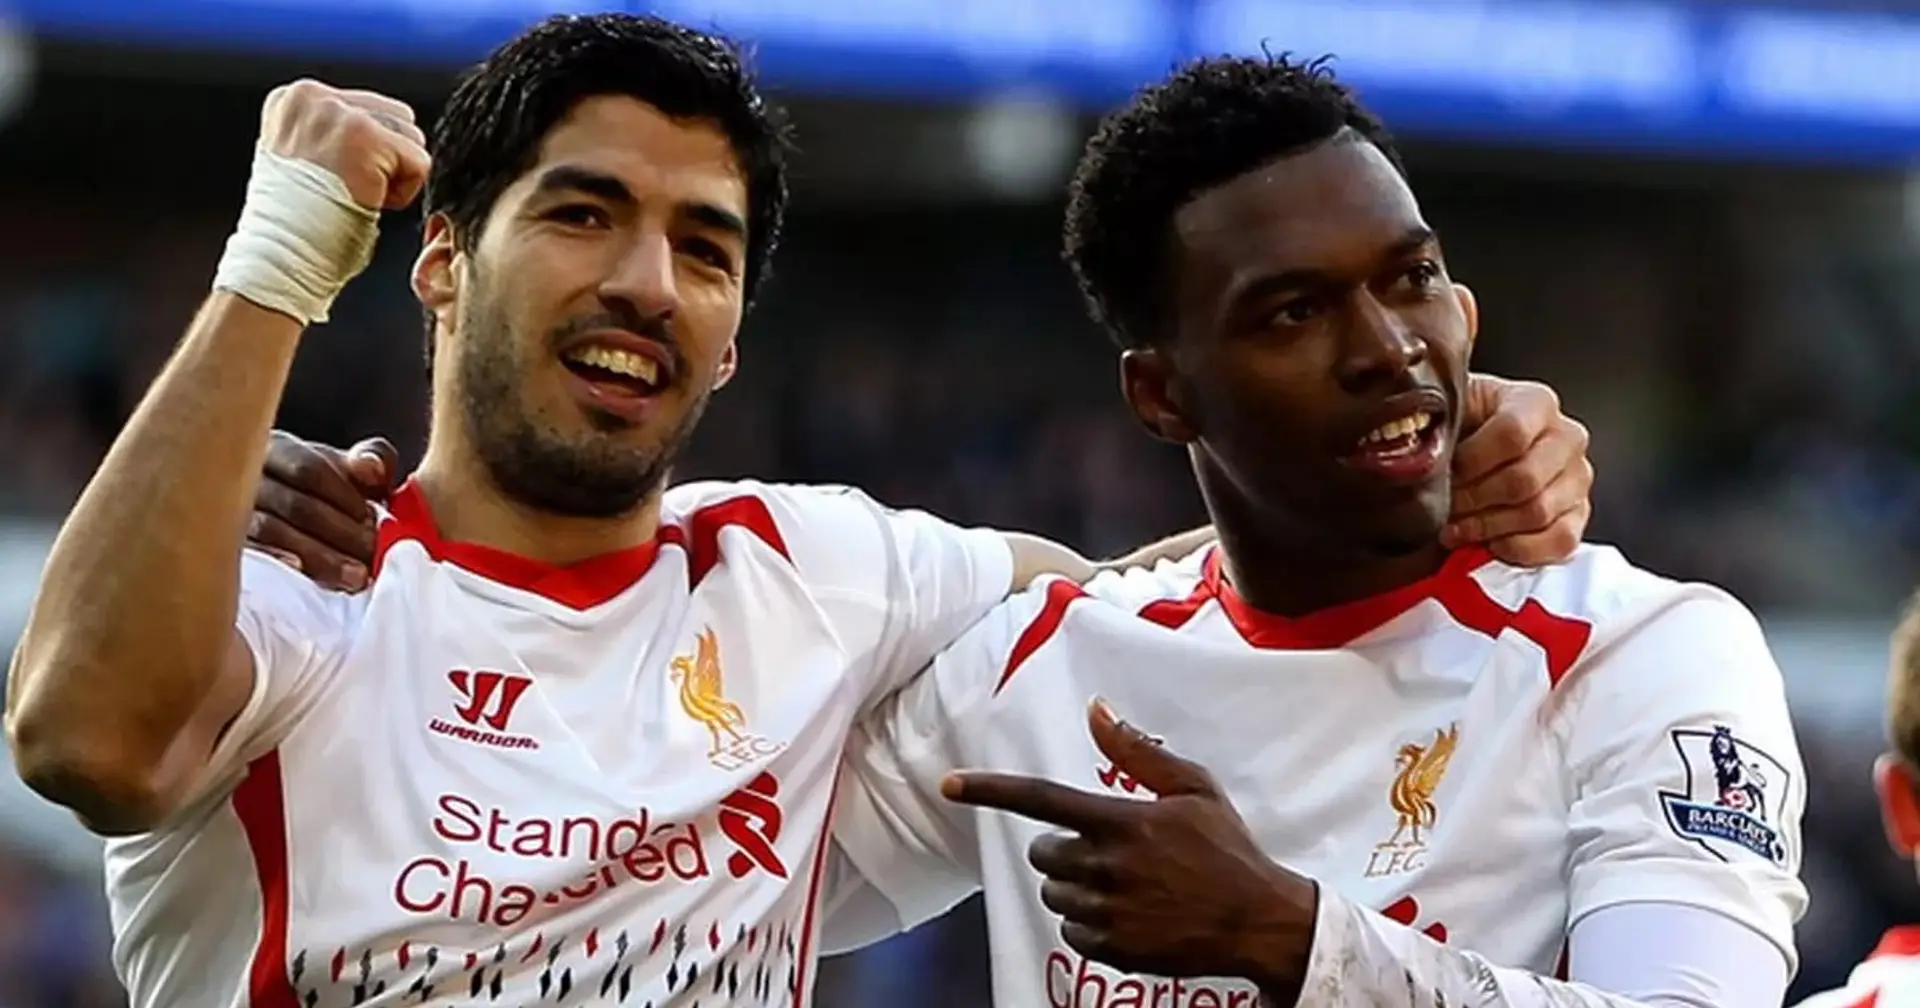 'When we combined we caused problems everywhere': Sturridge on Suarez partnership, wishes they played together for longer